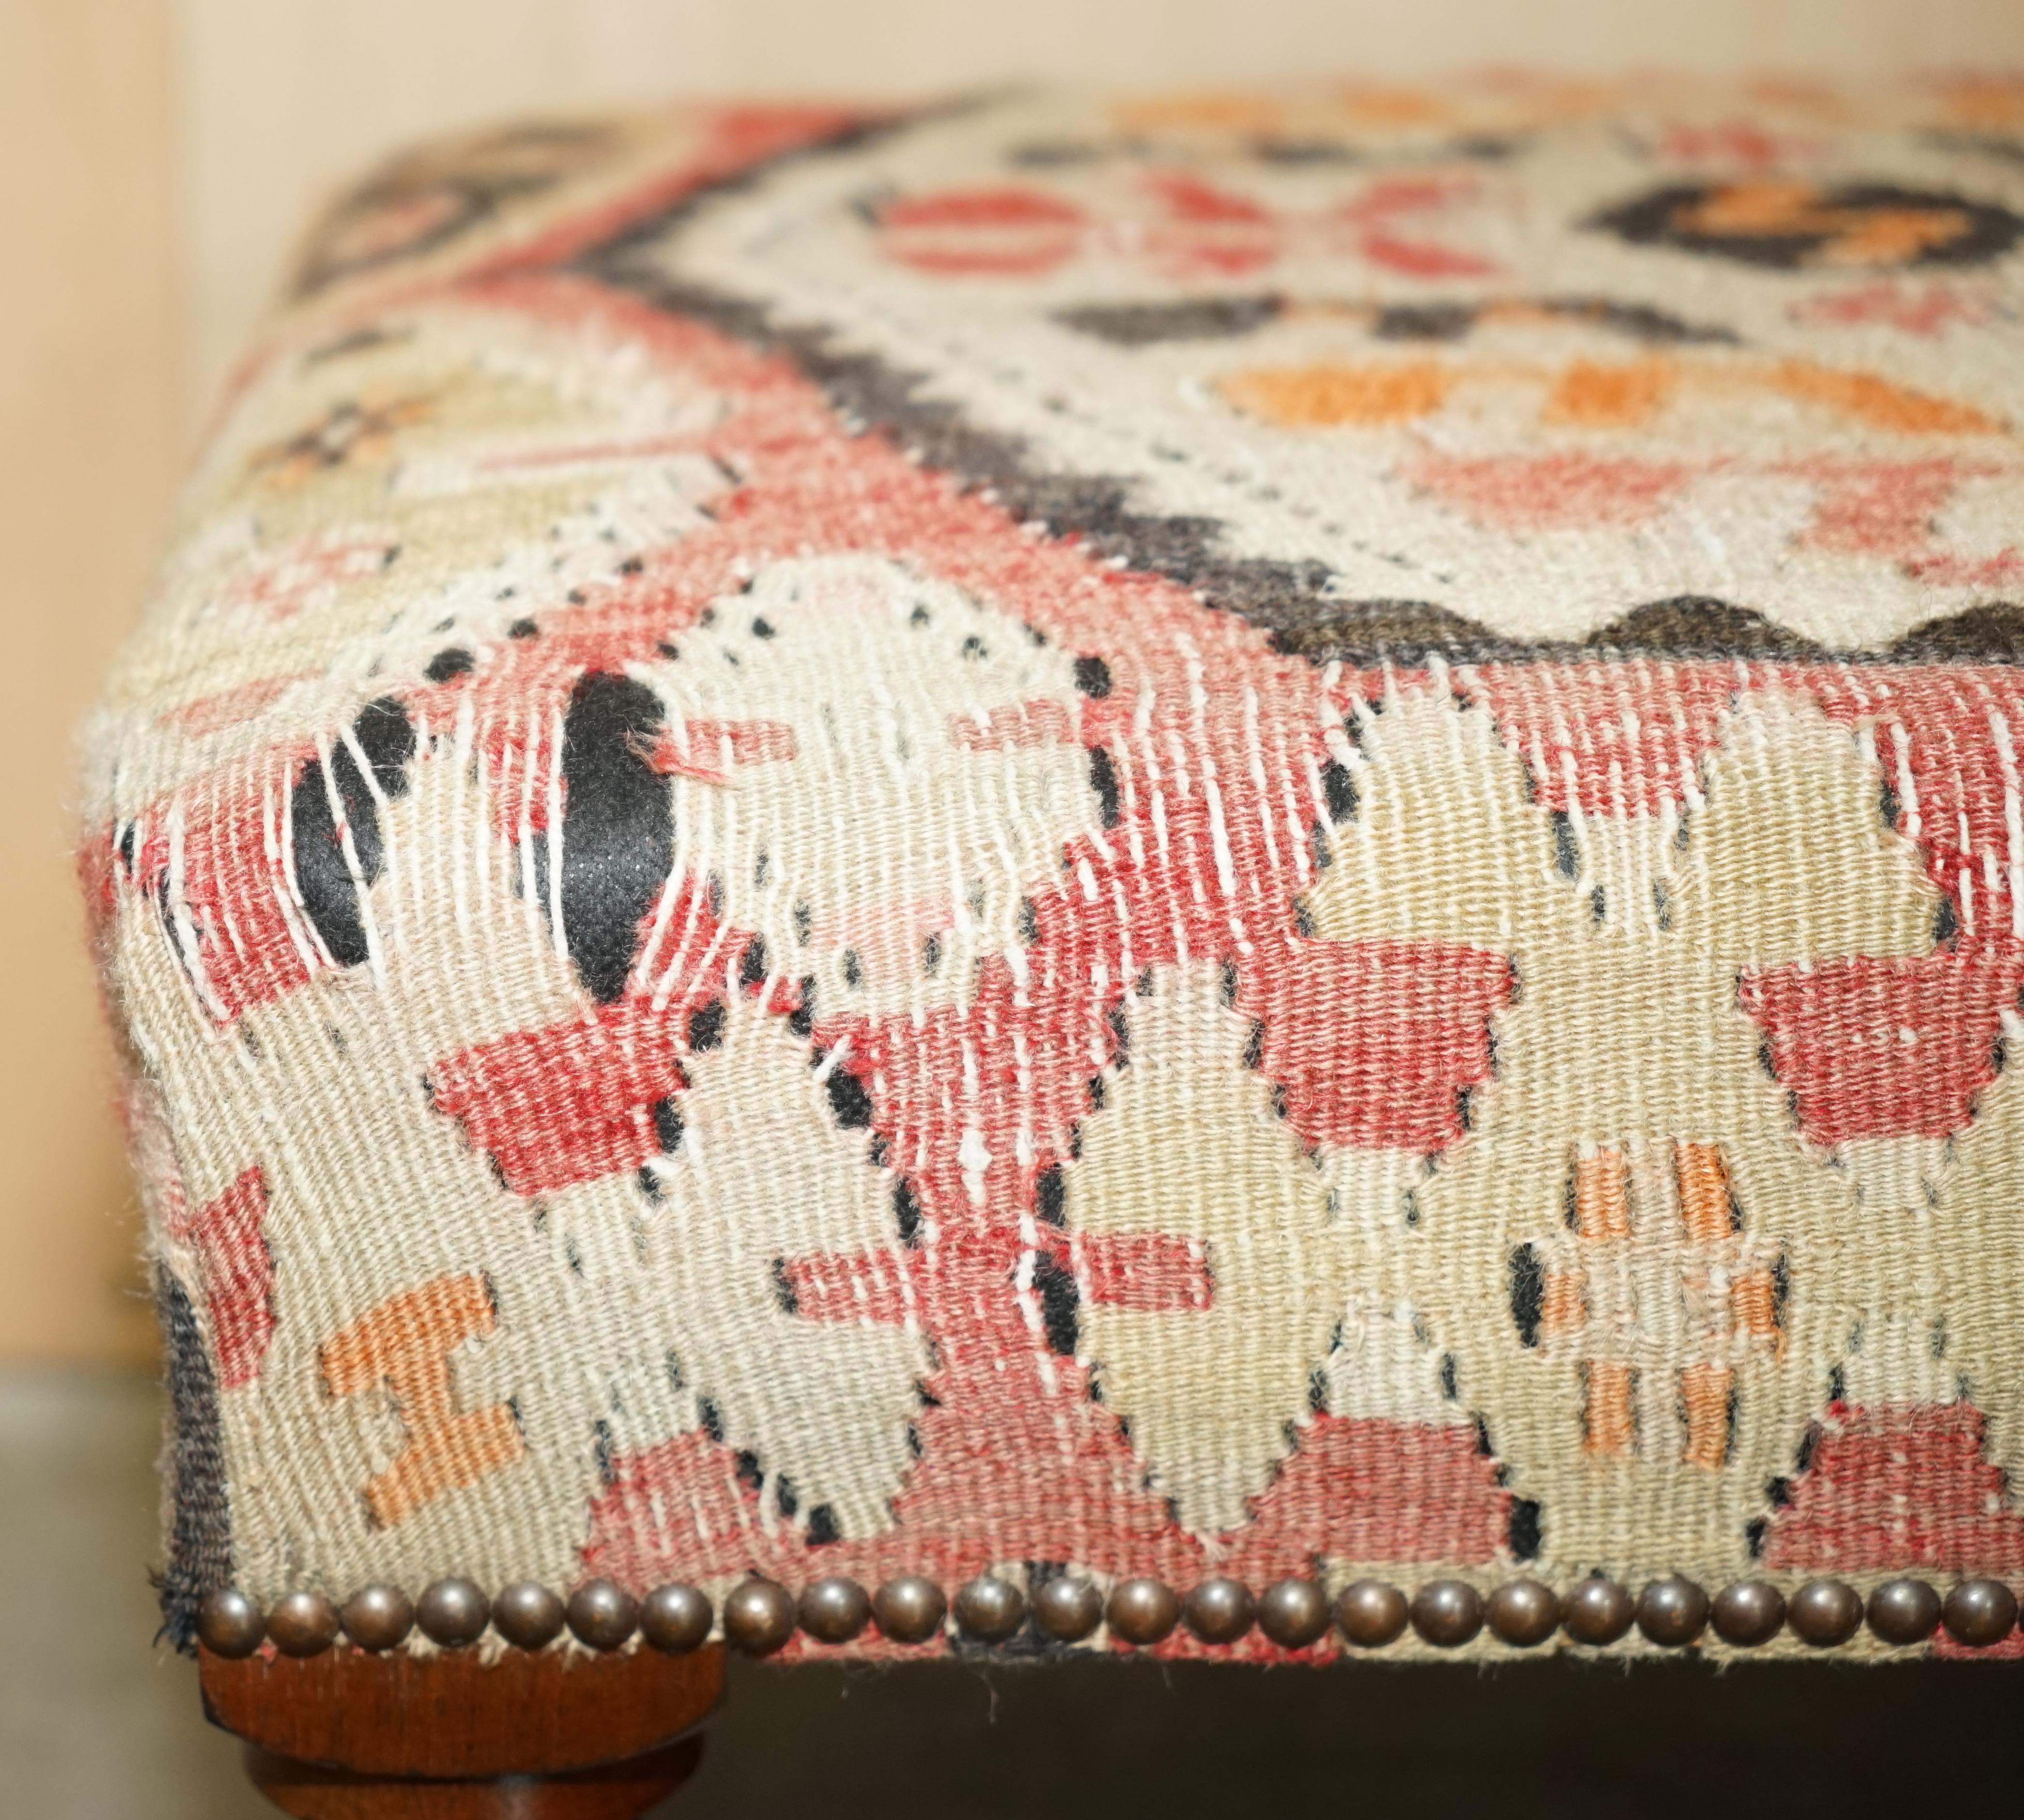 English STUNNING AND COLLECTABLE ViNTAGE GEORGE SMITH CHELSEA KILIM FOOTSTOOL OTTOMAN